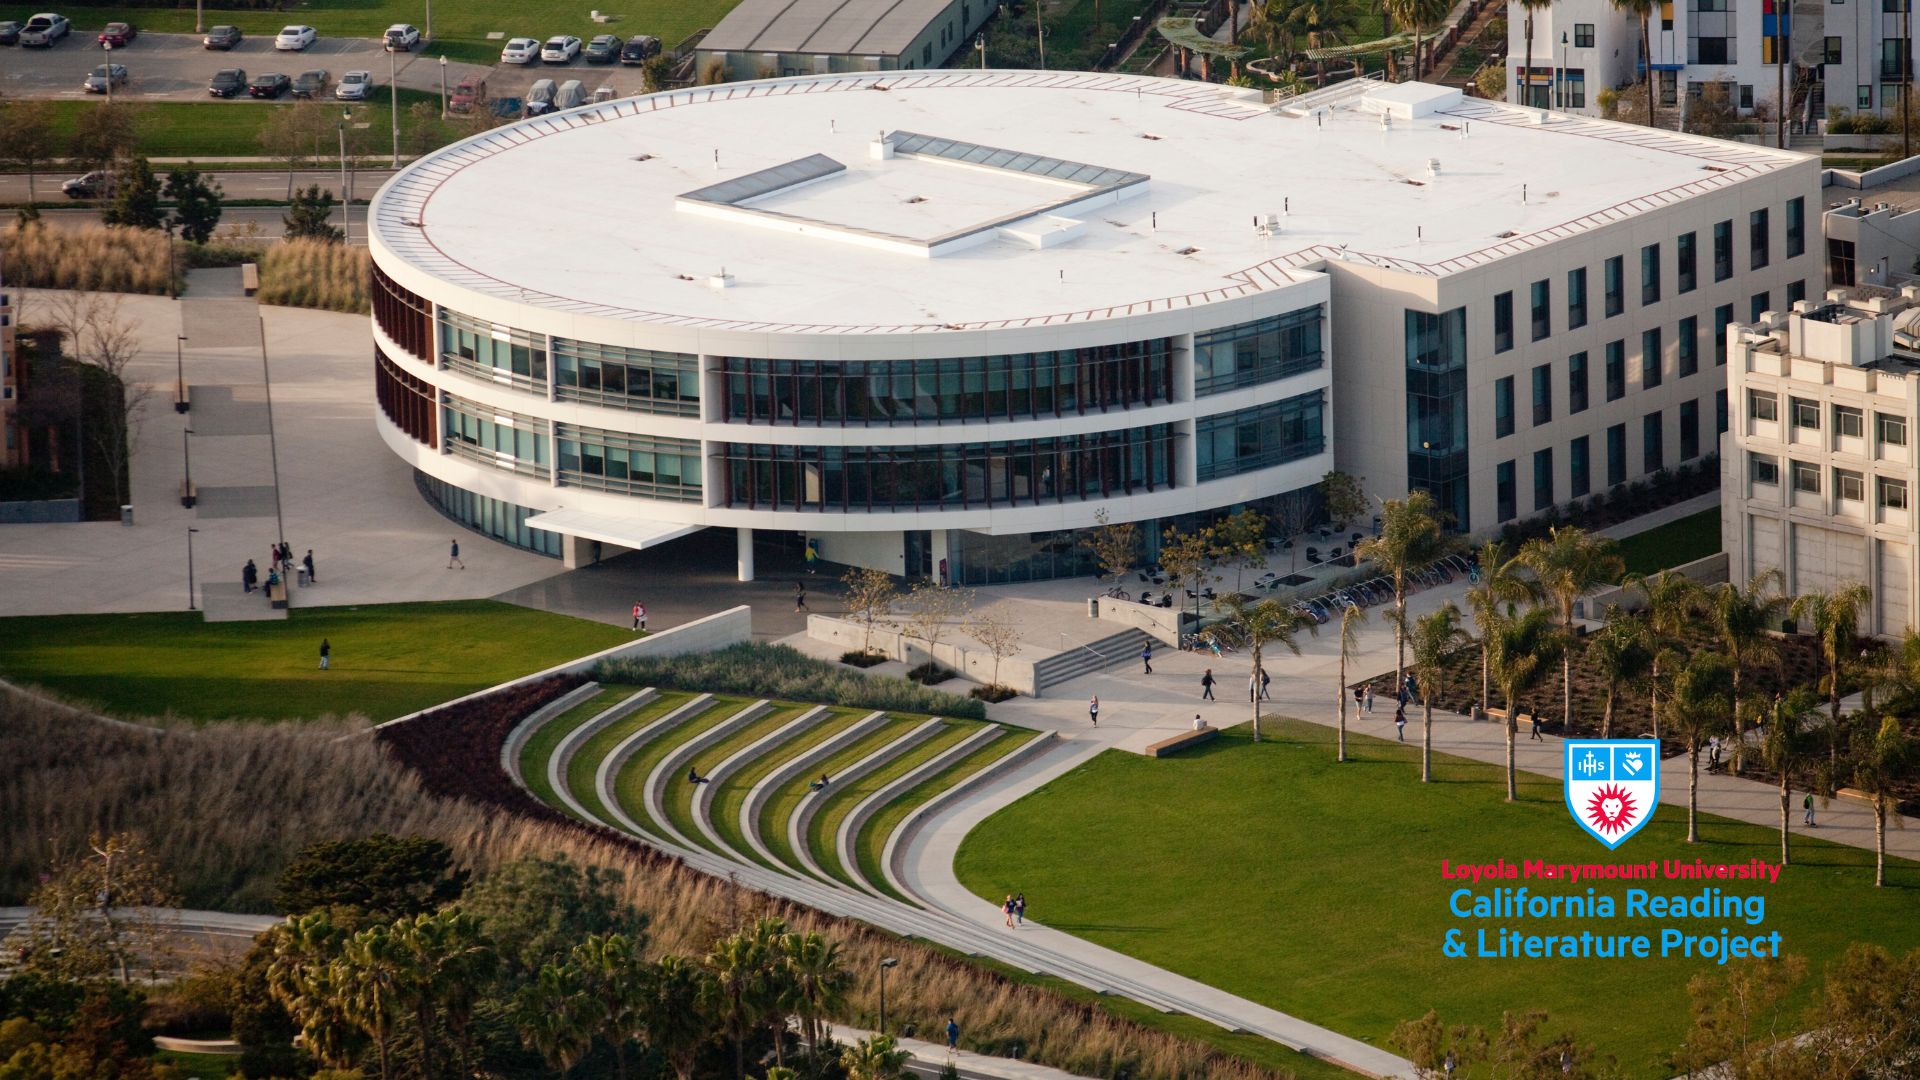 An overhead view of the beautiful LMU Library on a sunny day